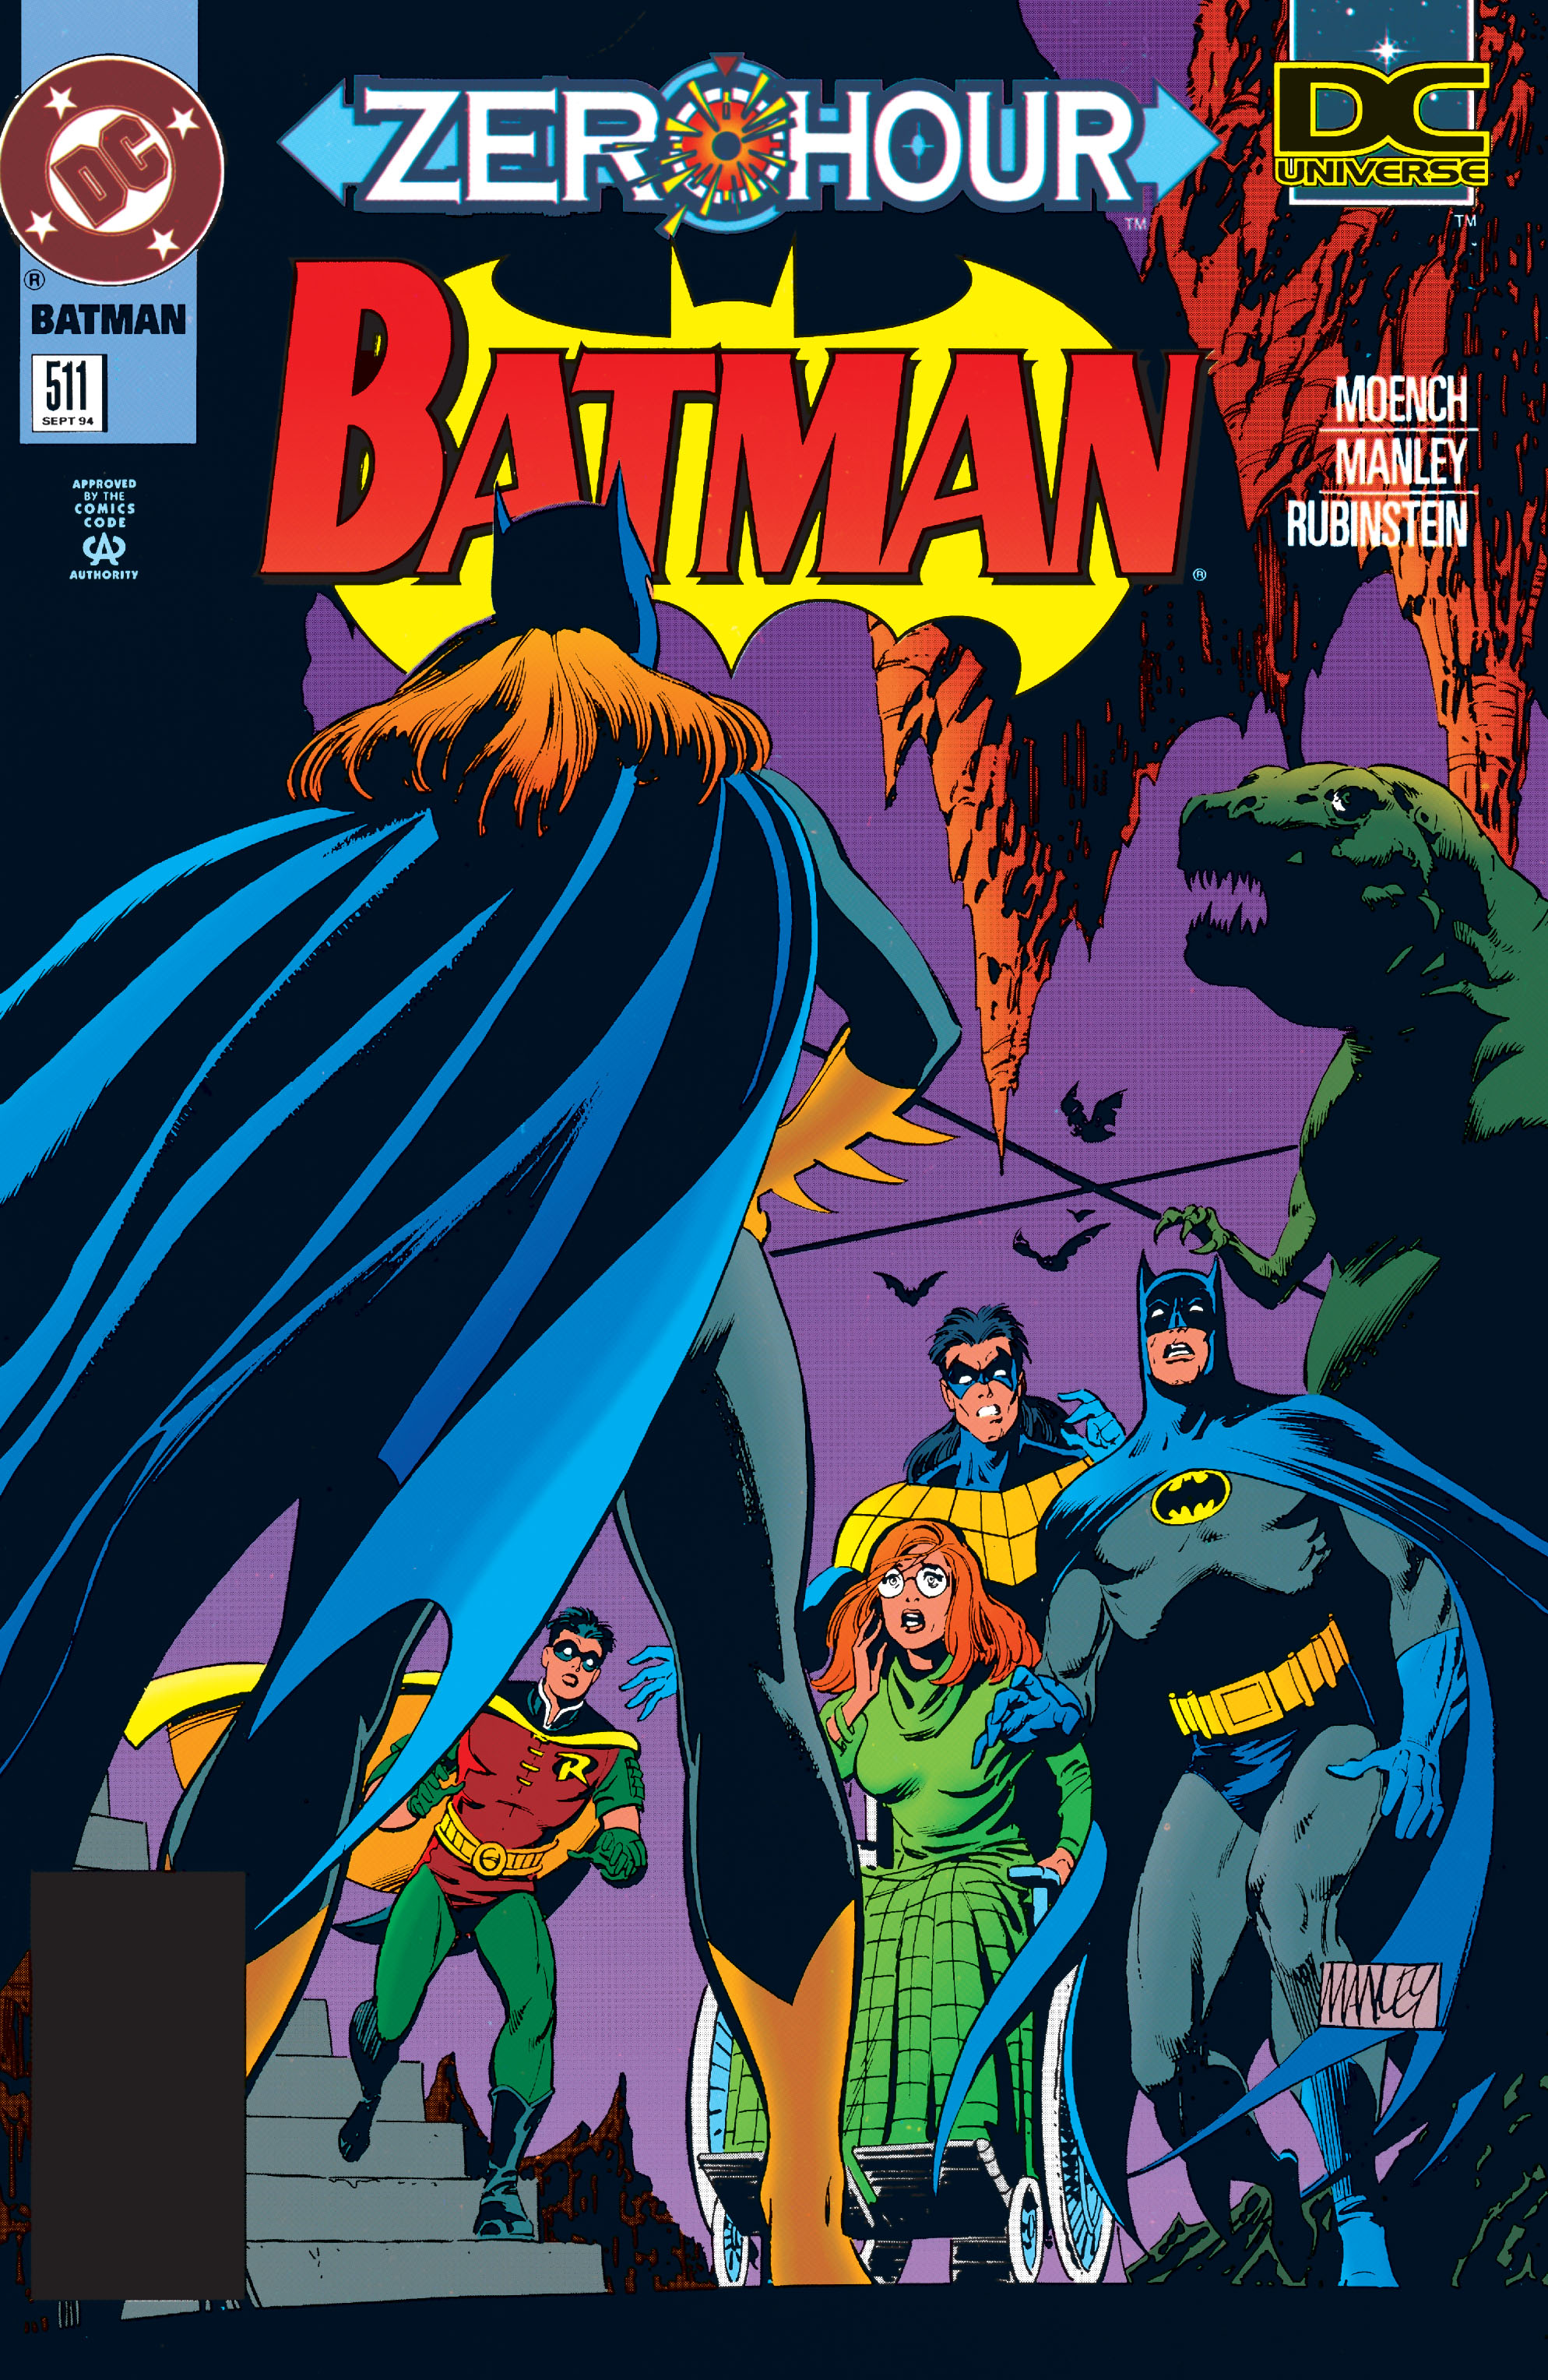 Batman 1940 Issue 511 | Read Batman 1940 Issue 511 comic online in high  quality. Read Full Comic online for free - Read comics online in high  quality .| READ COMIC ONLINE